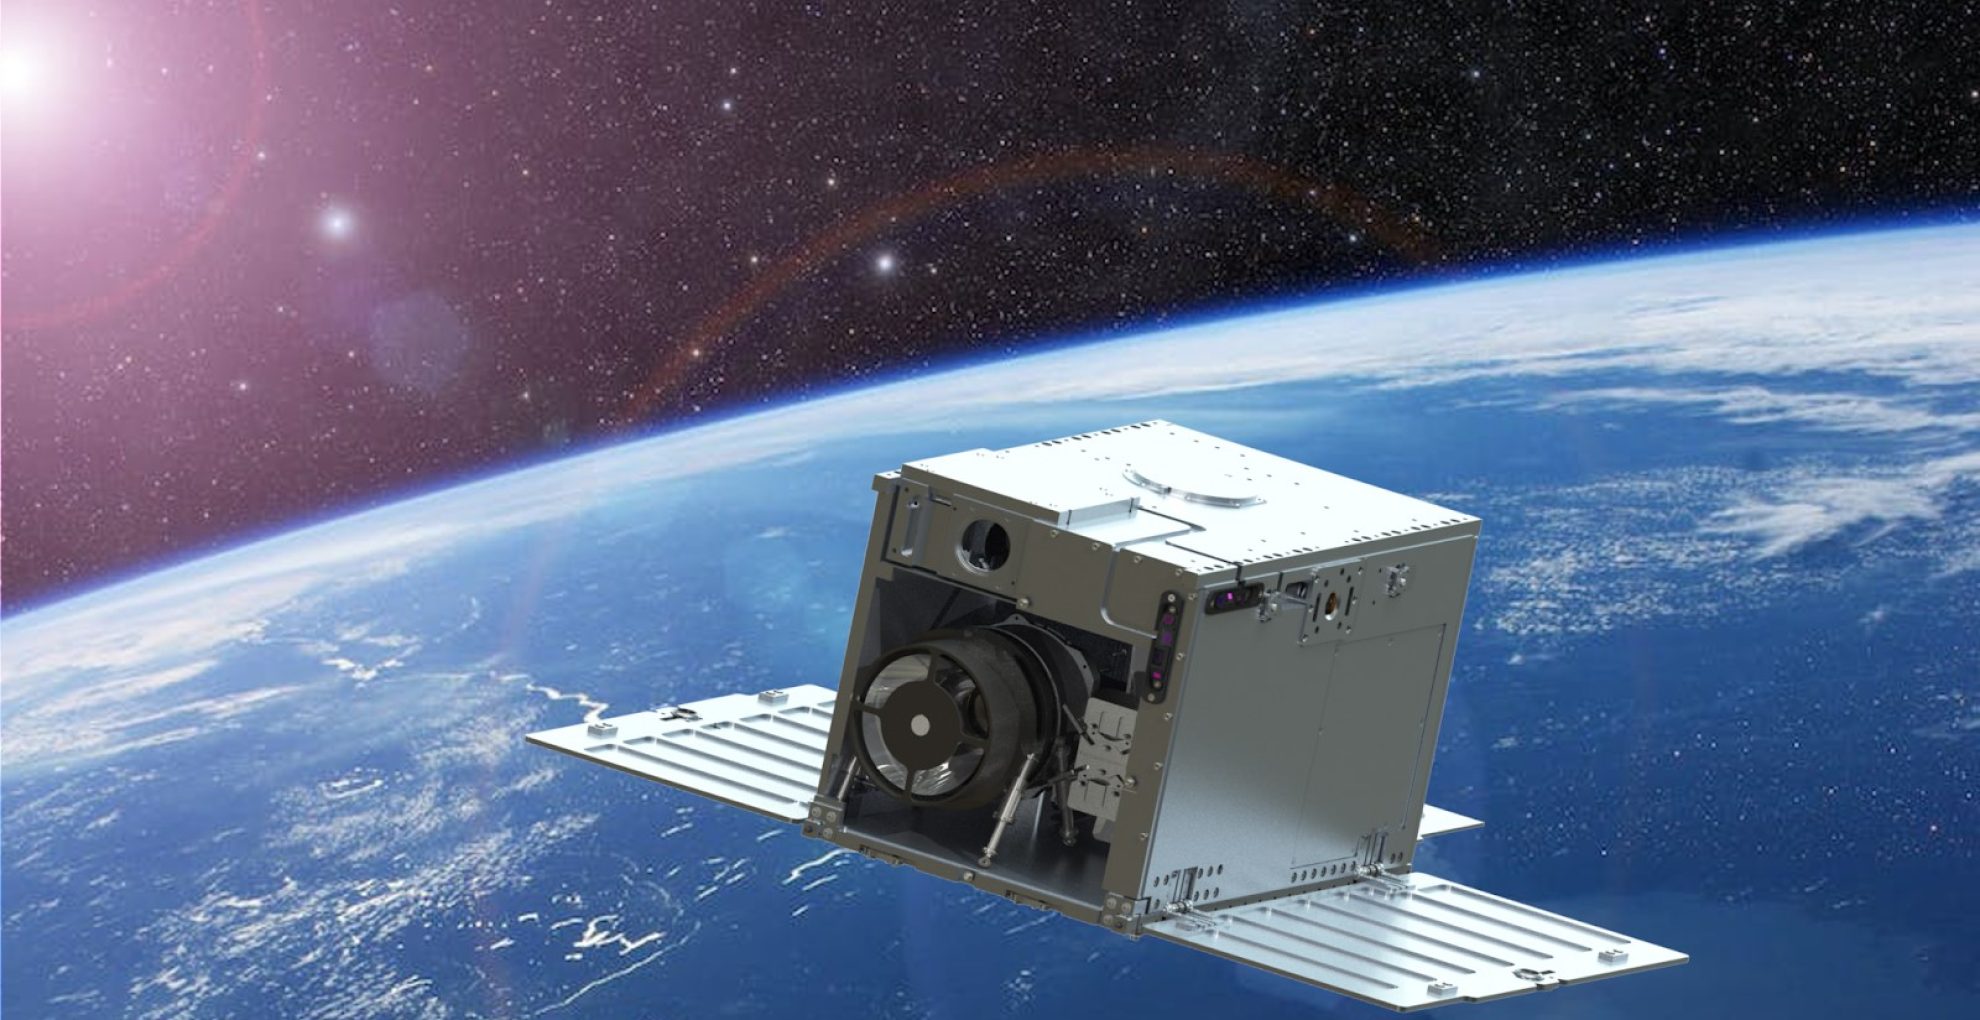 Artist's rendering of the MANTIS CubeSat, which will be about the size of a toaster oven, orbiting Earth. (Credit: Dana Chafetz)